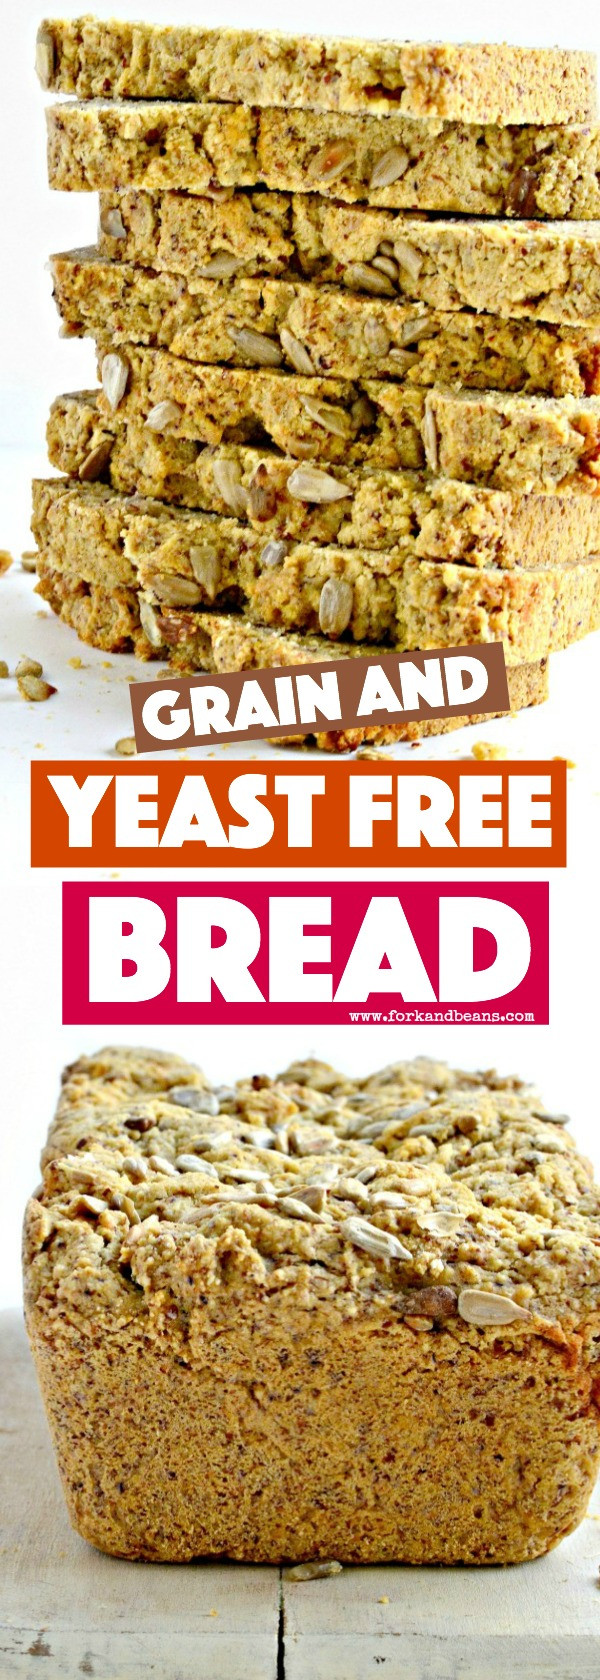 Grain Free Bread With Yeast
 Yeast Free Bread Fork and Beans